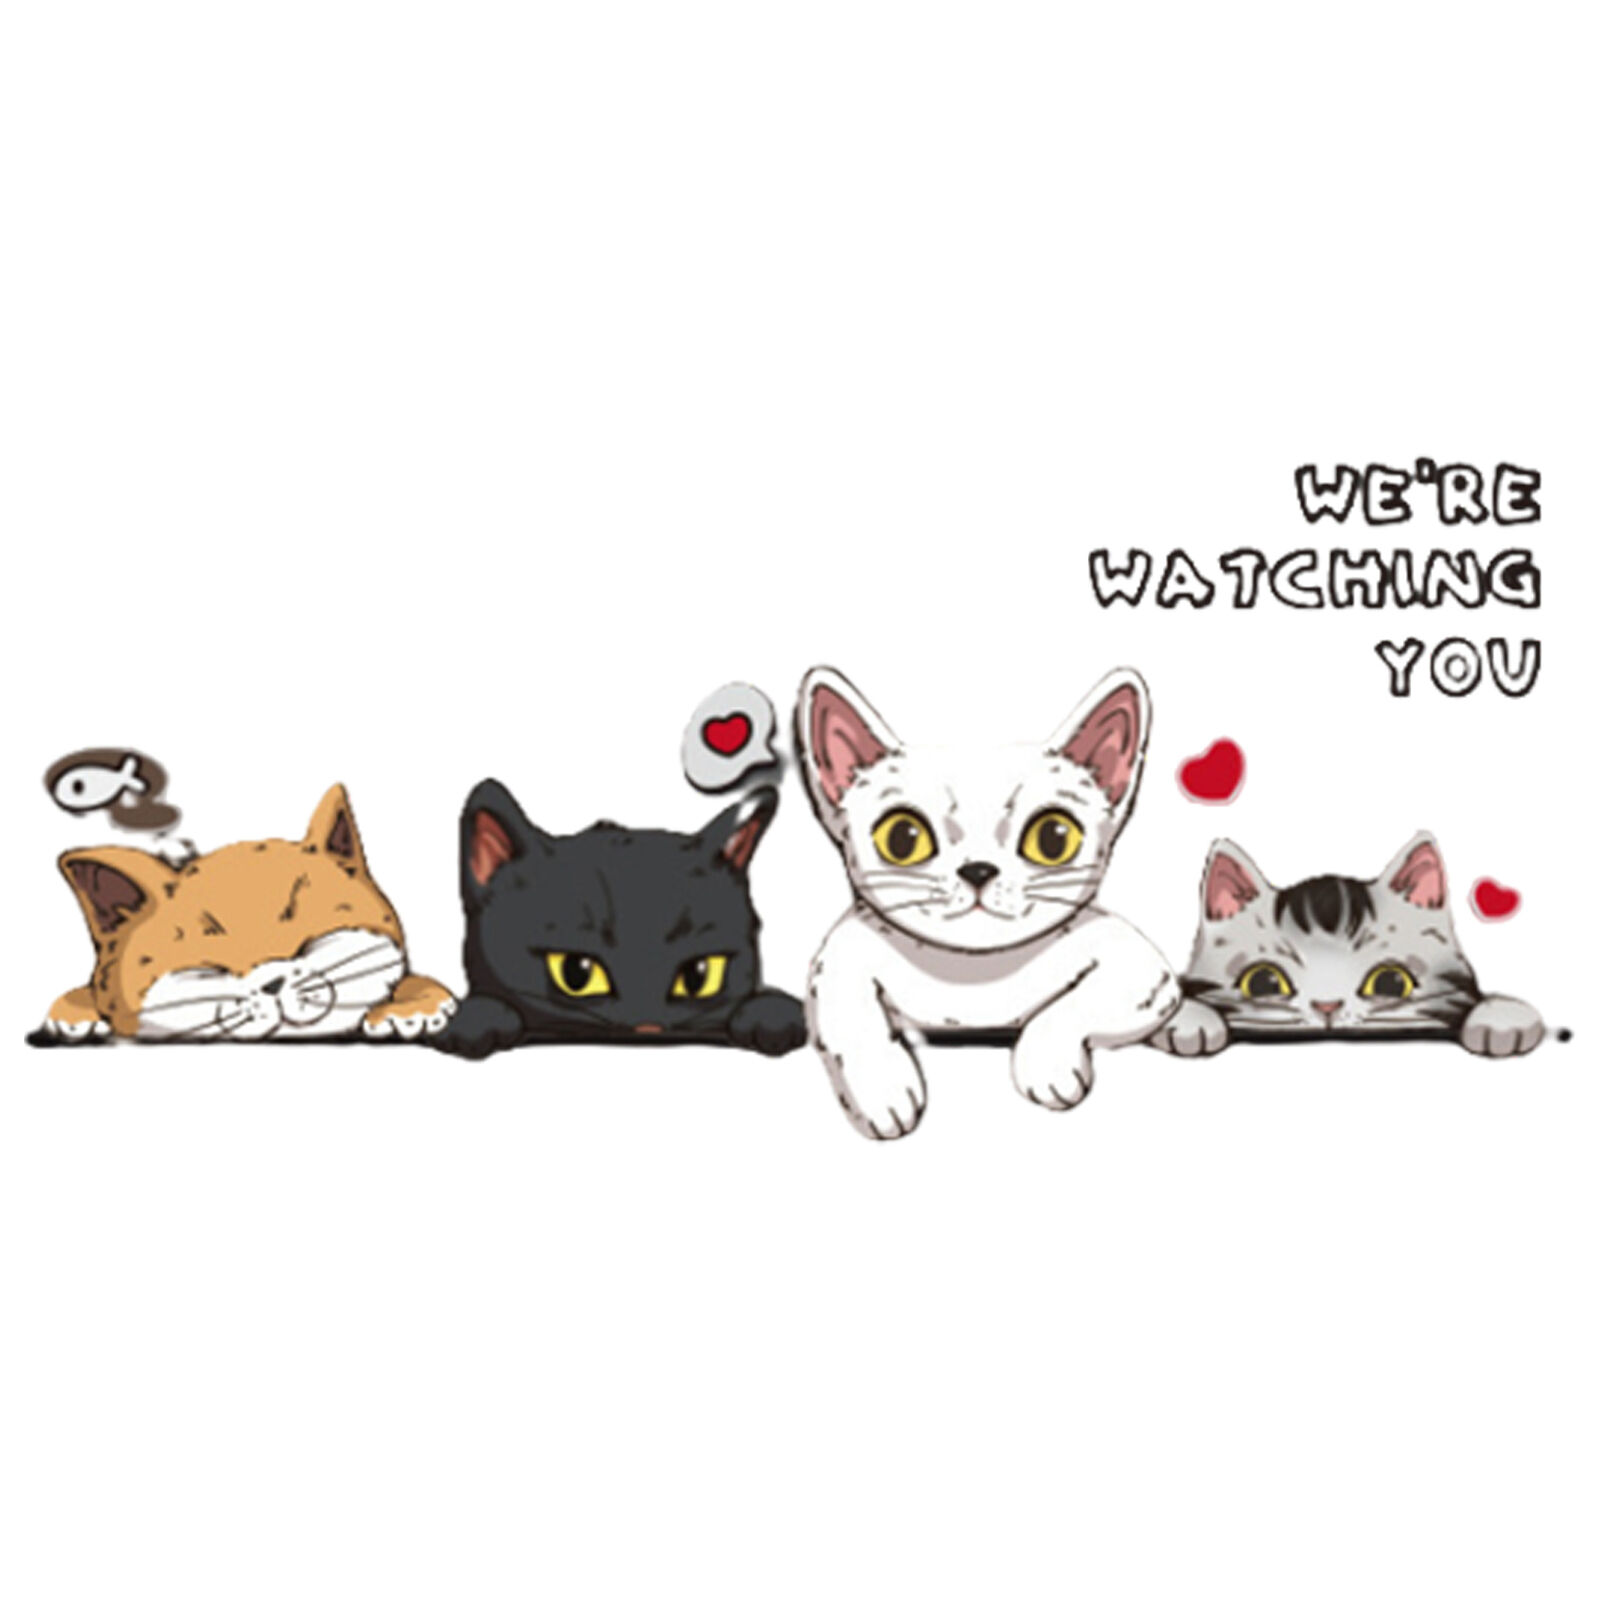  Funny Cute Cats Decal Stickers Auto Car Cat Decal Car Sticker for cosy*2